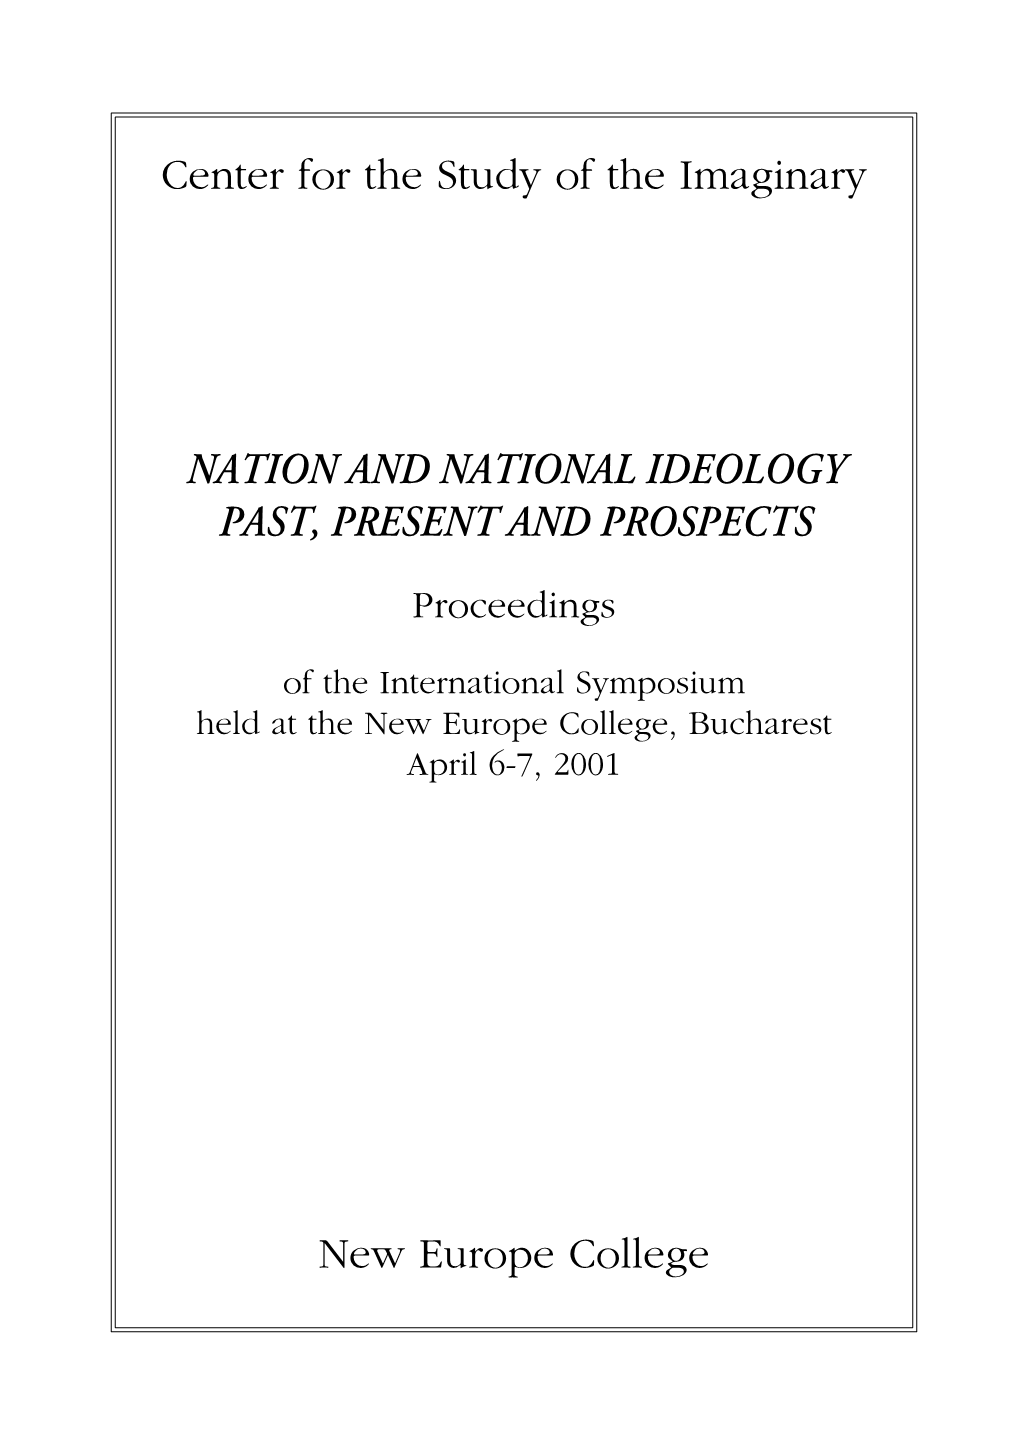 NATION and NATIONAL IDEOLOGY PAST, PRESENT and PROSPECTS Center for the Study of the Imaginary New Europe College